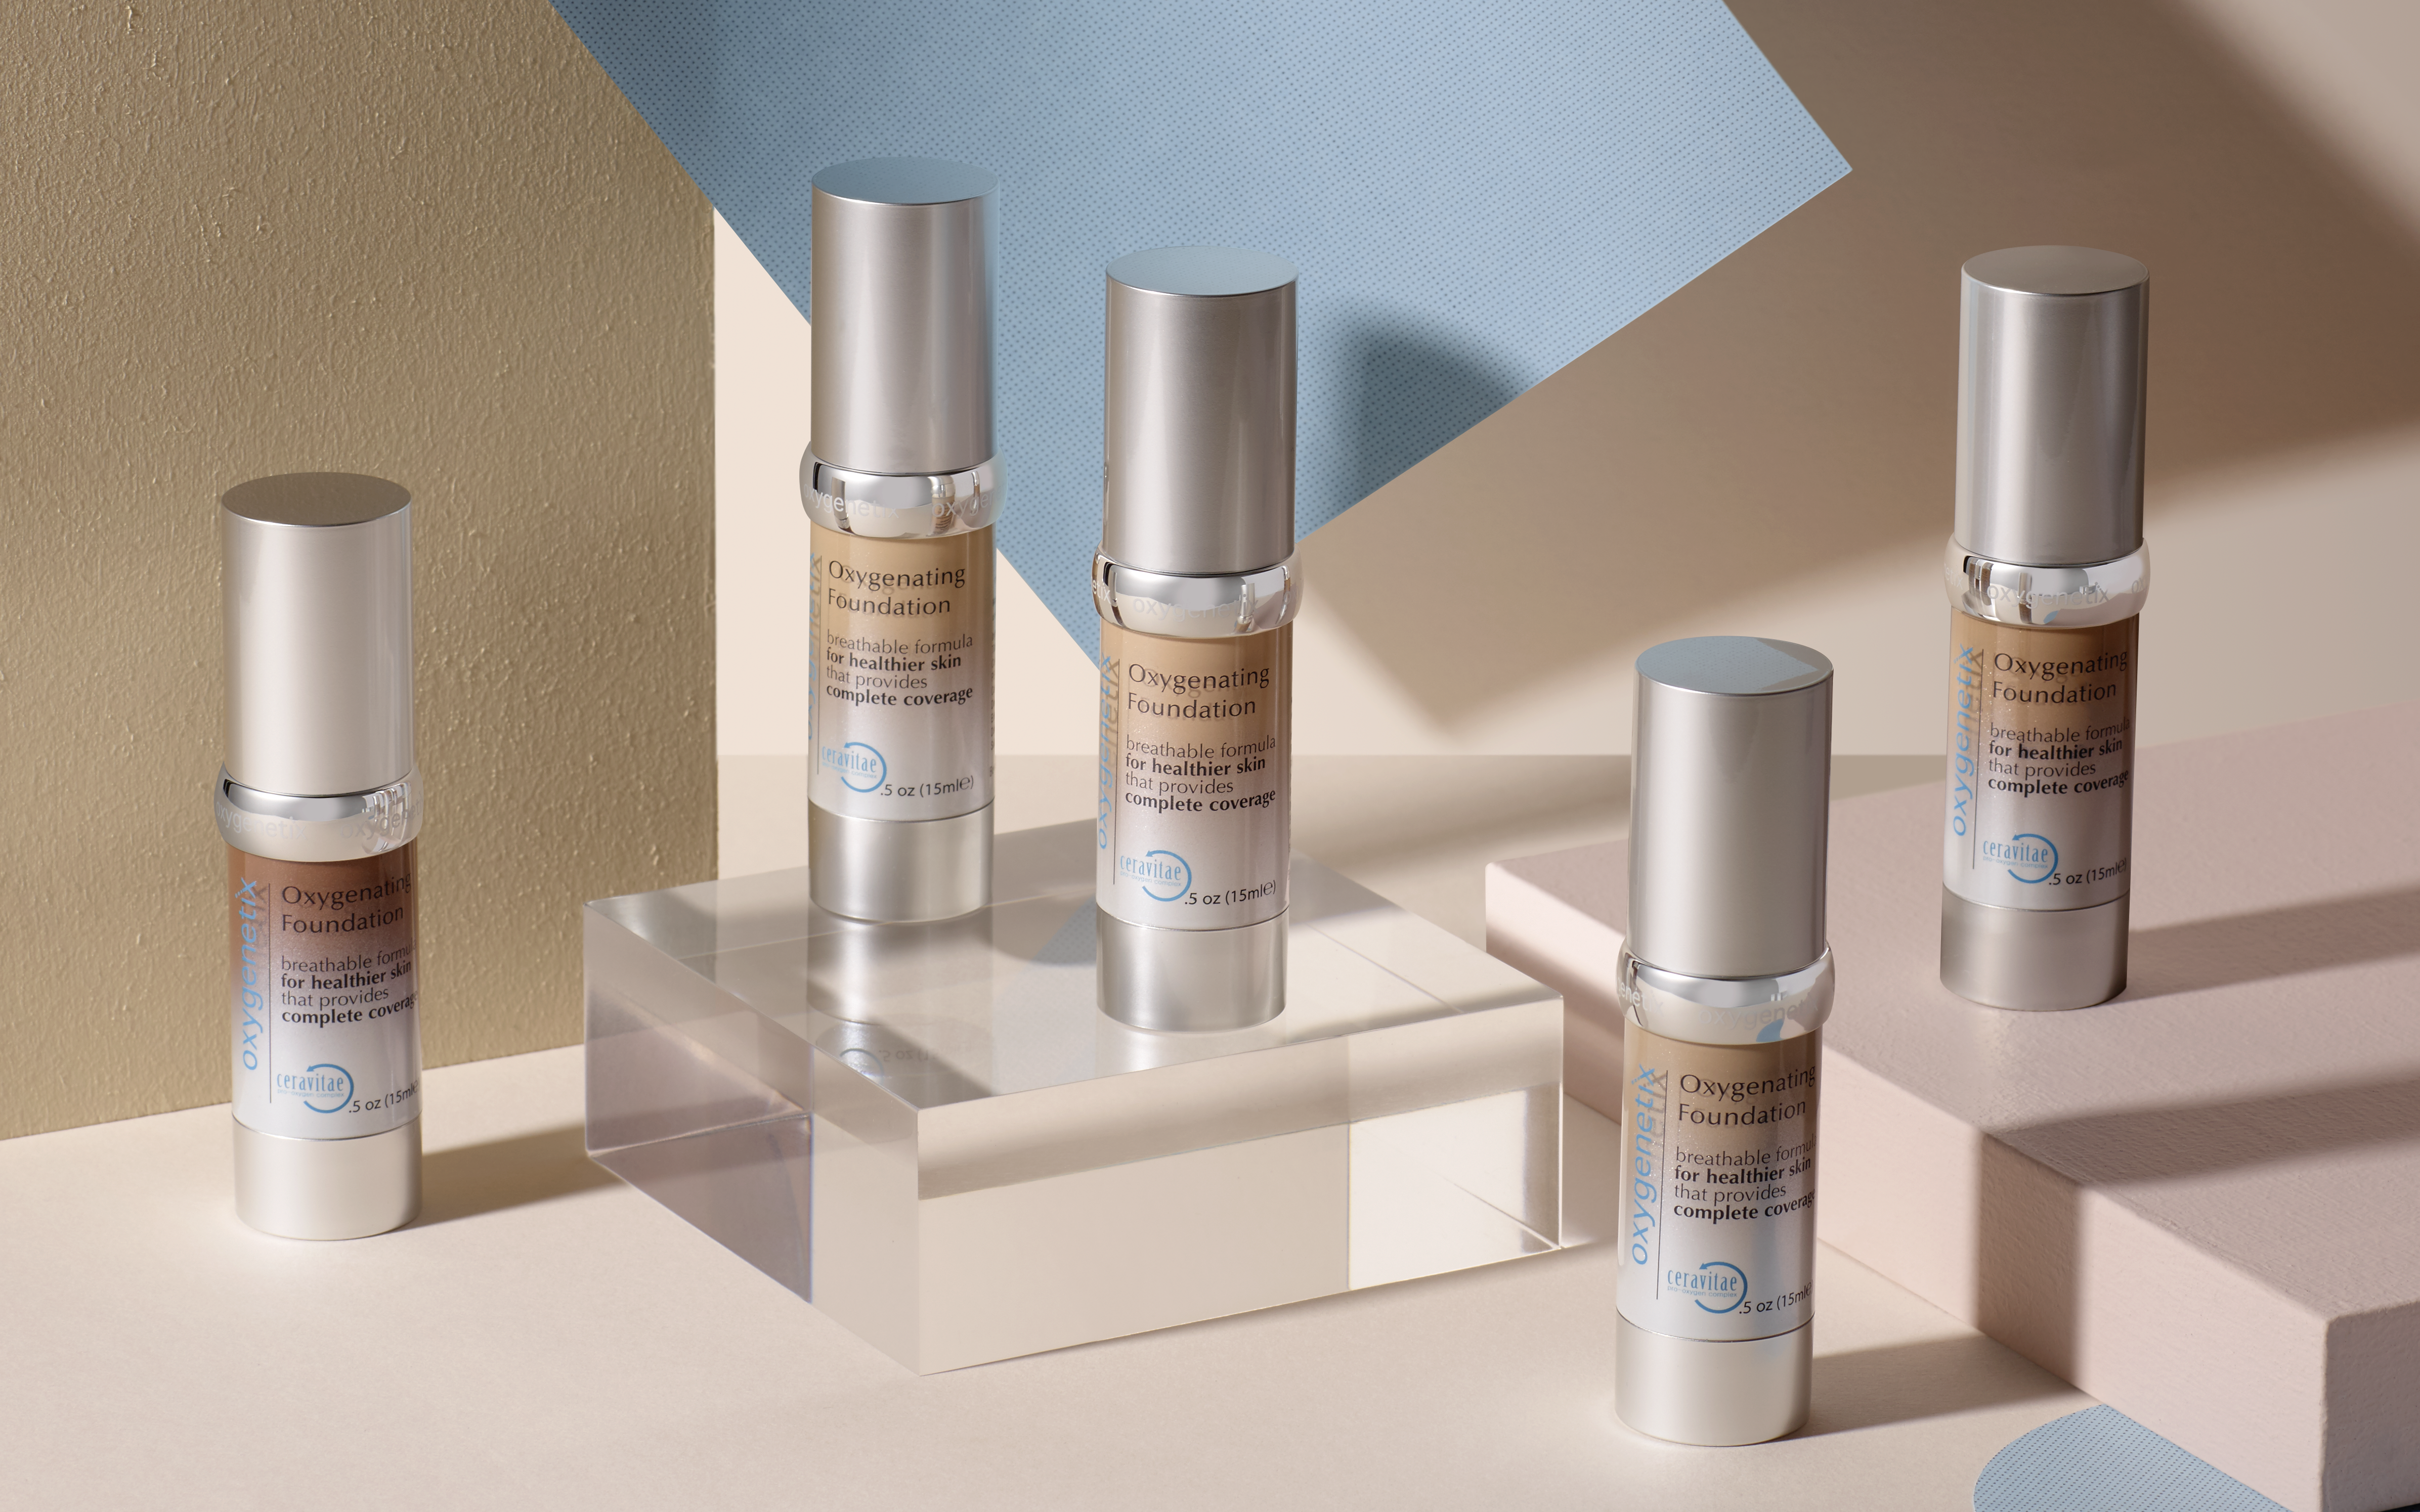 Why Oxygenating Foundation Was Voted Most-Splurge Worthy for Large Pores